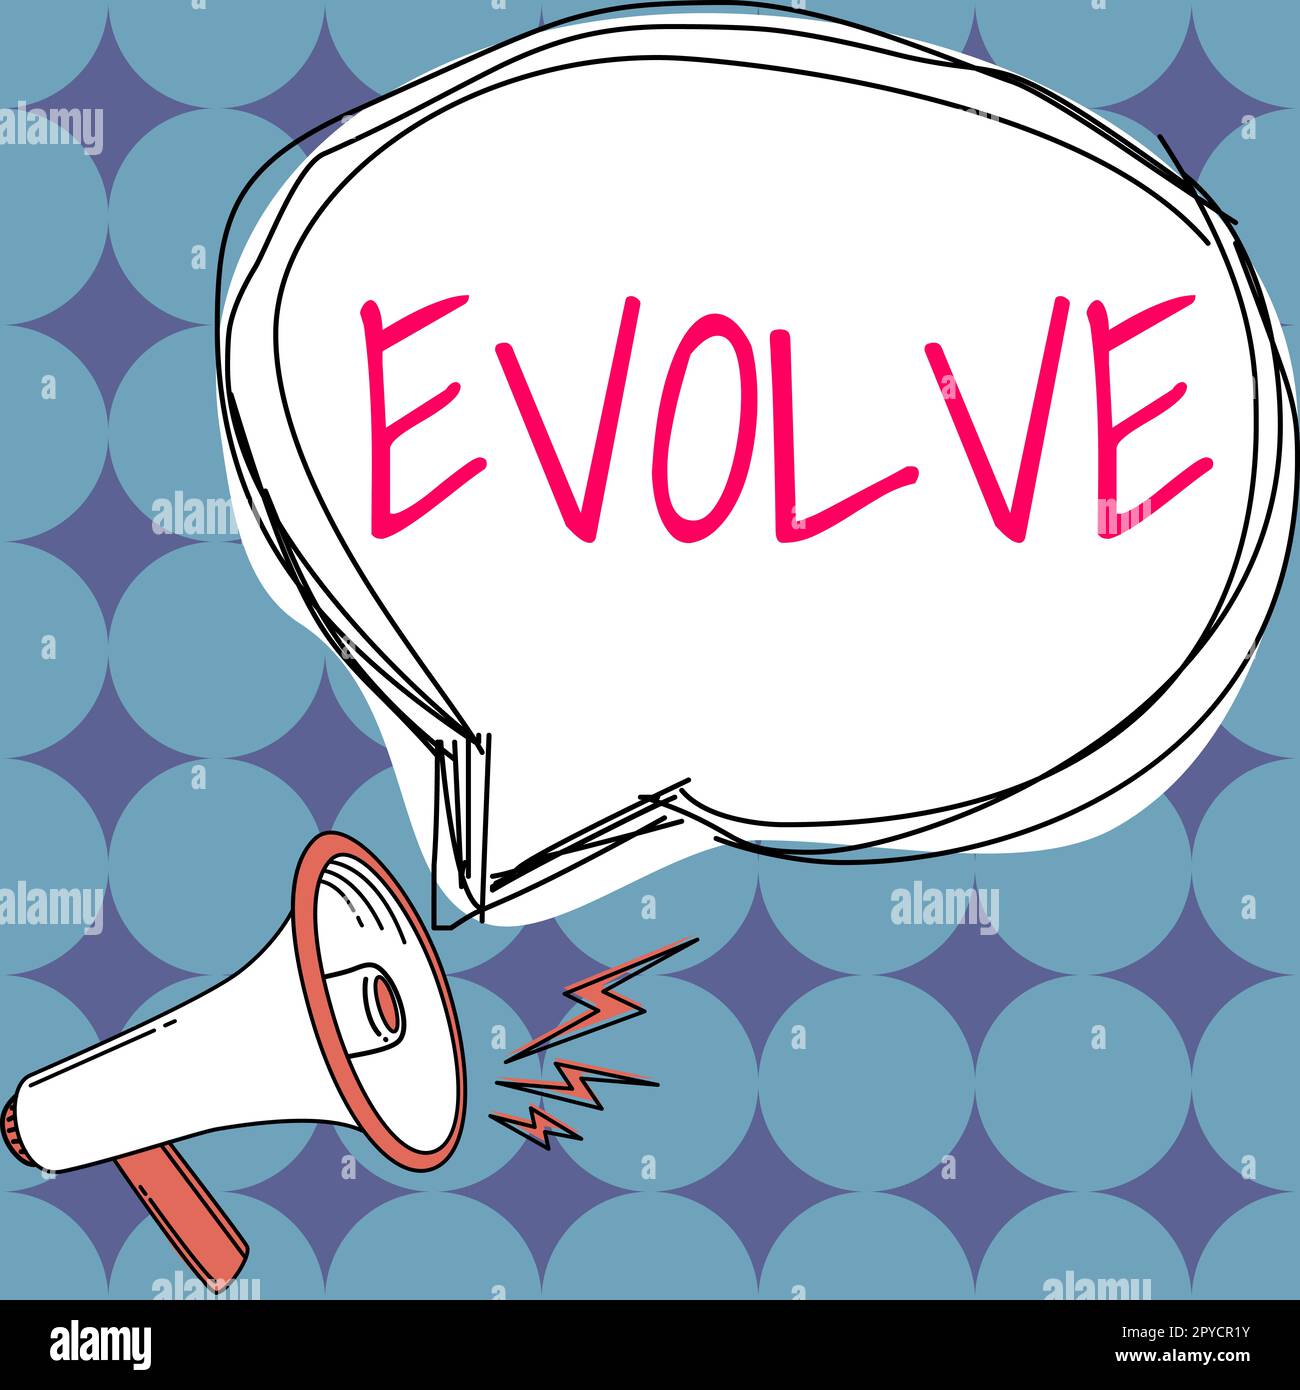 Sign displaying Evolve. Business approach develop gradually Improve your skills physique or personality Stock Photo